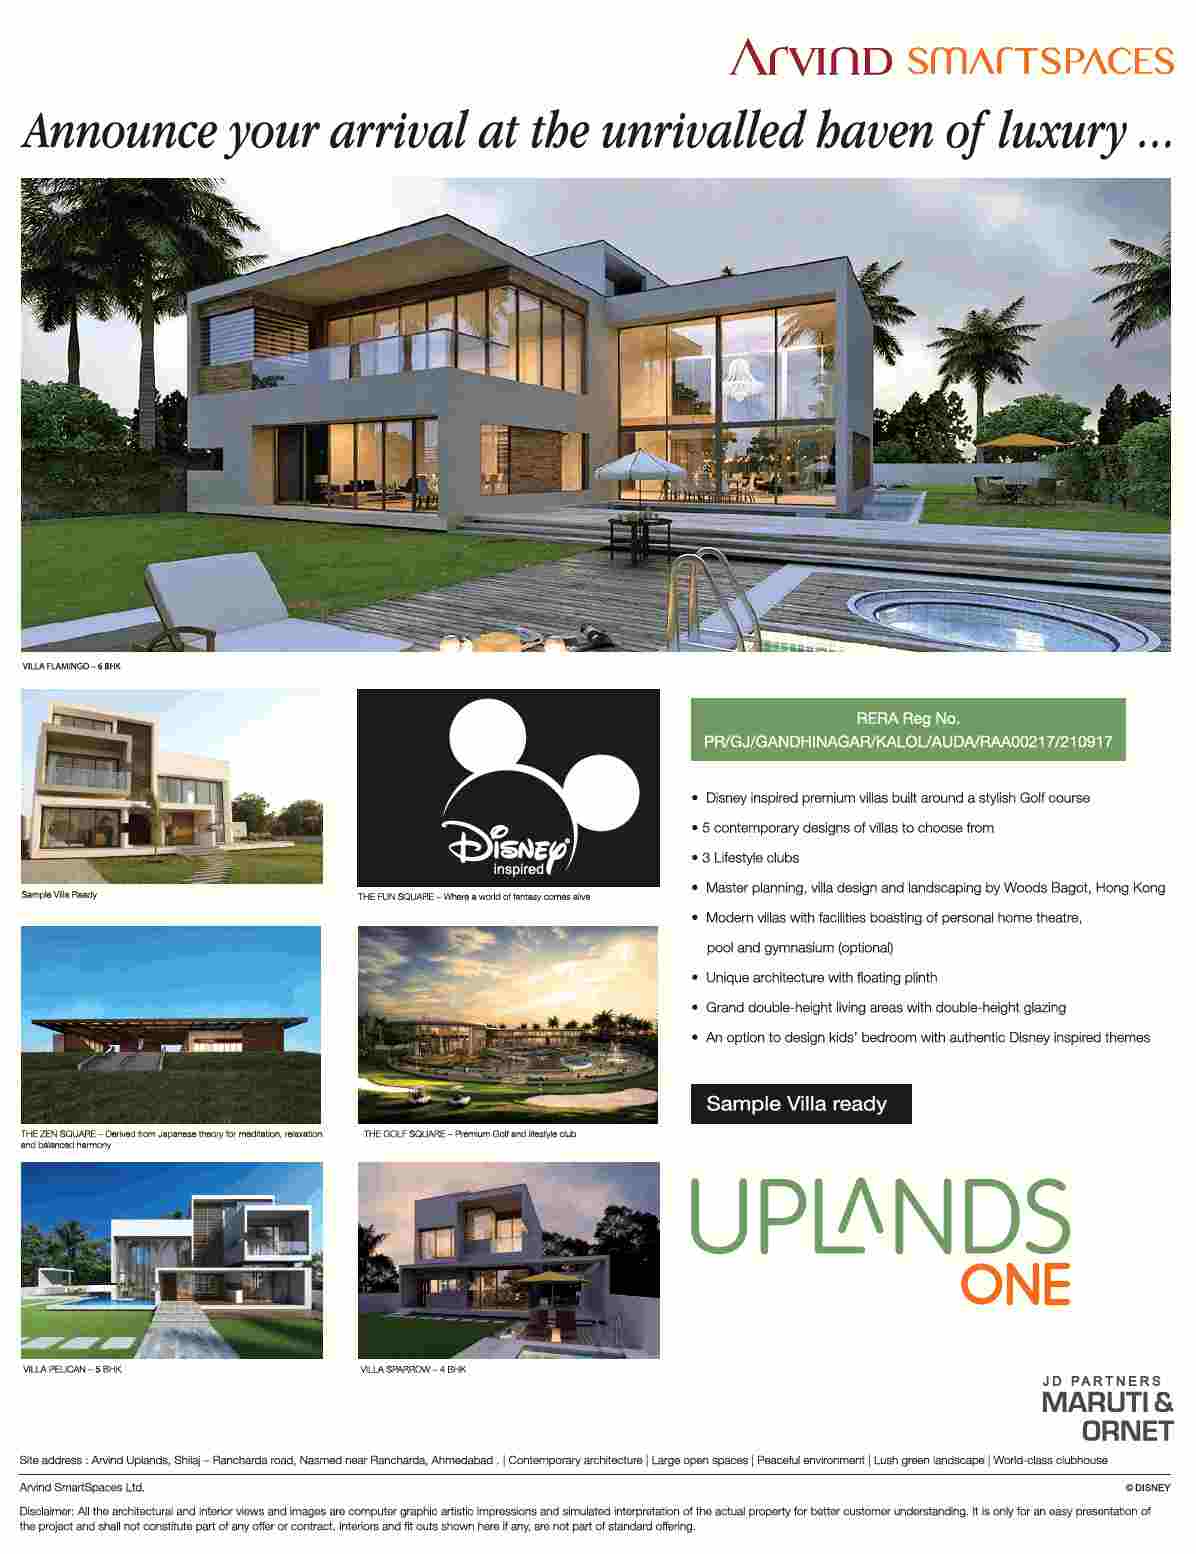 Announce your arrival at the unrivaled haven of luxury at Arvind Uplands in Ahmedabad Update